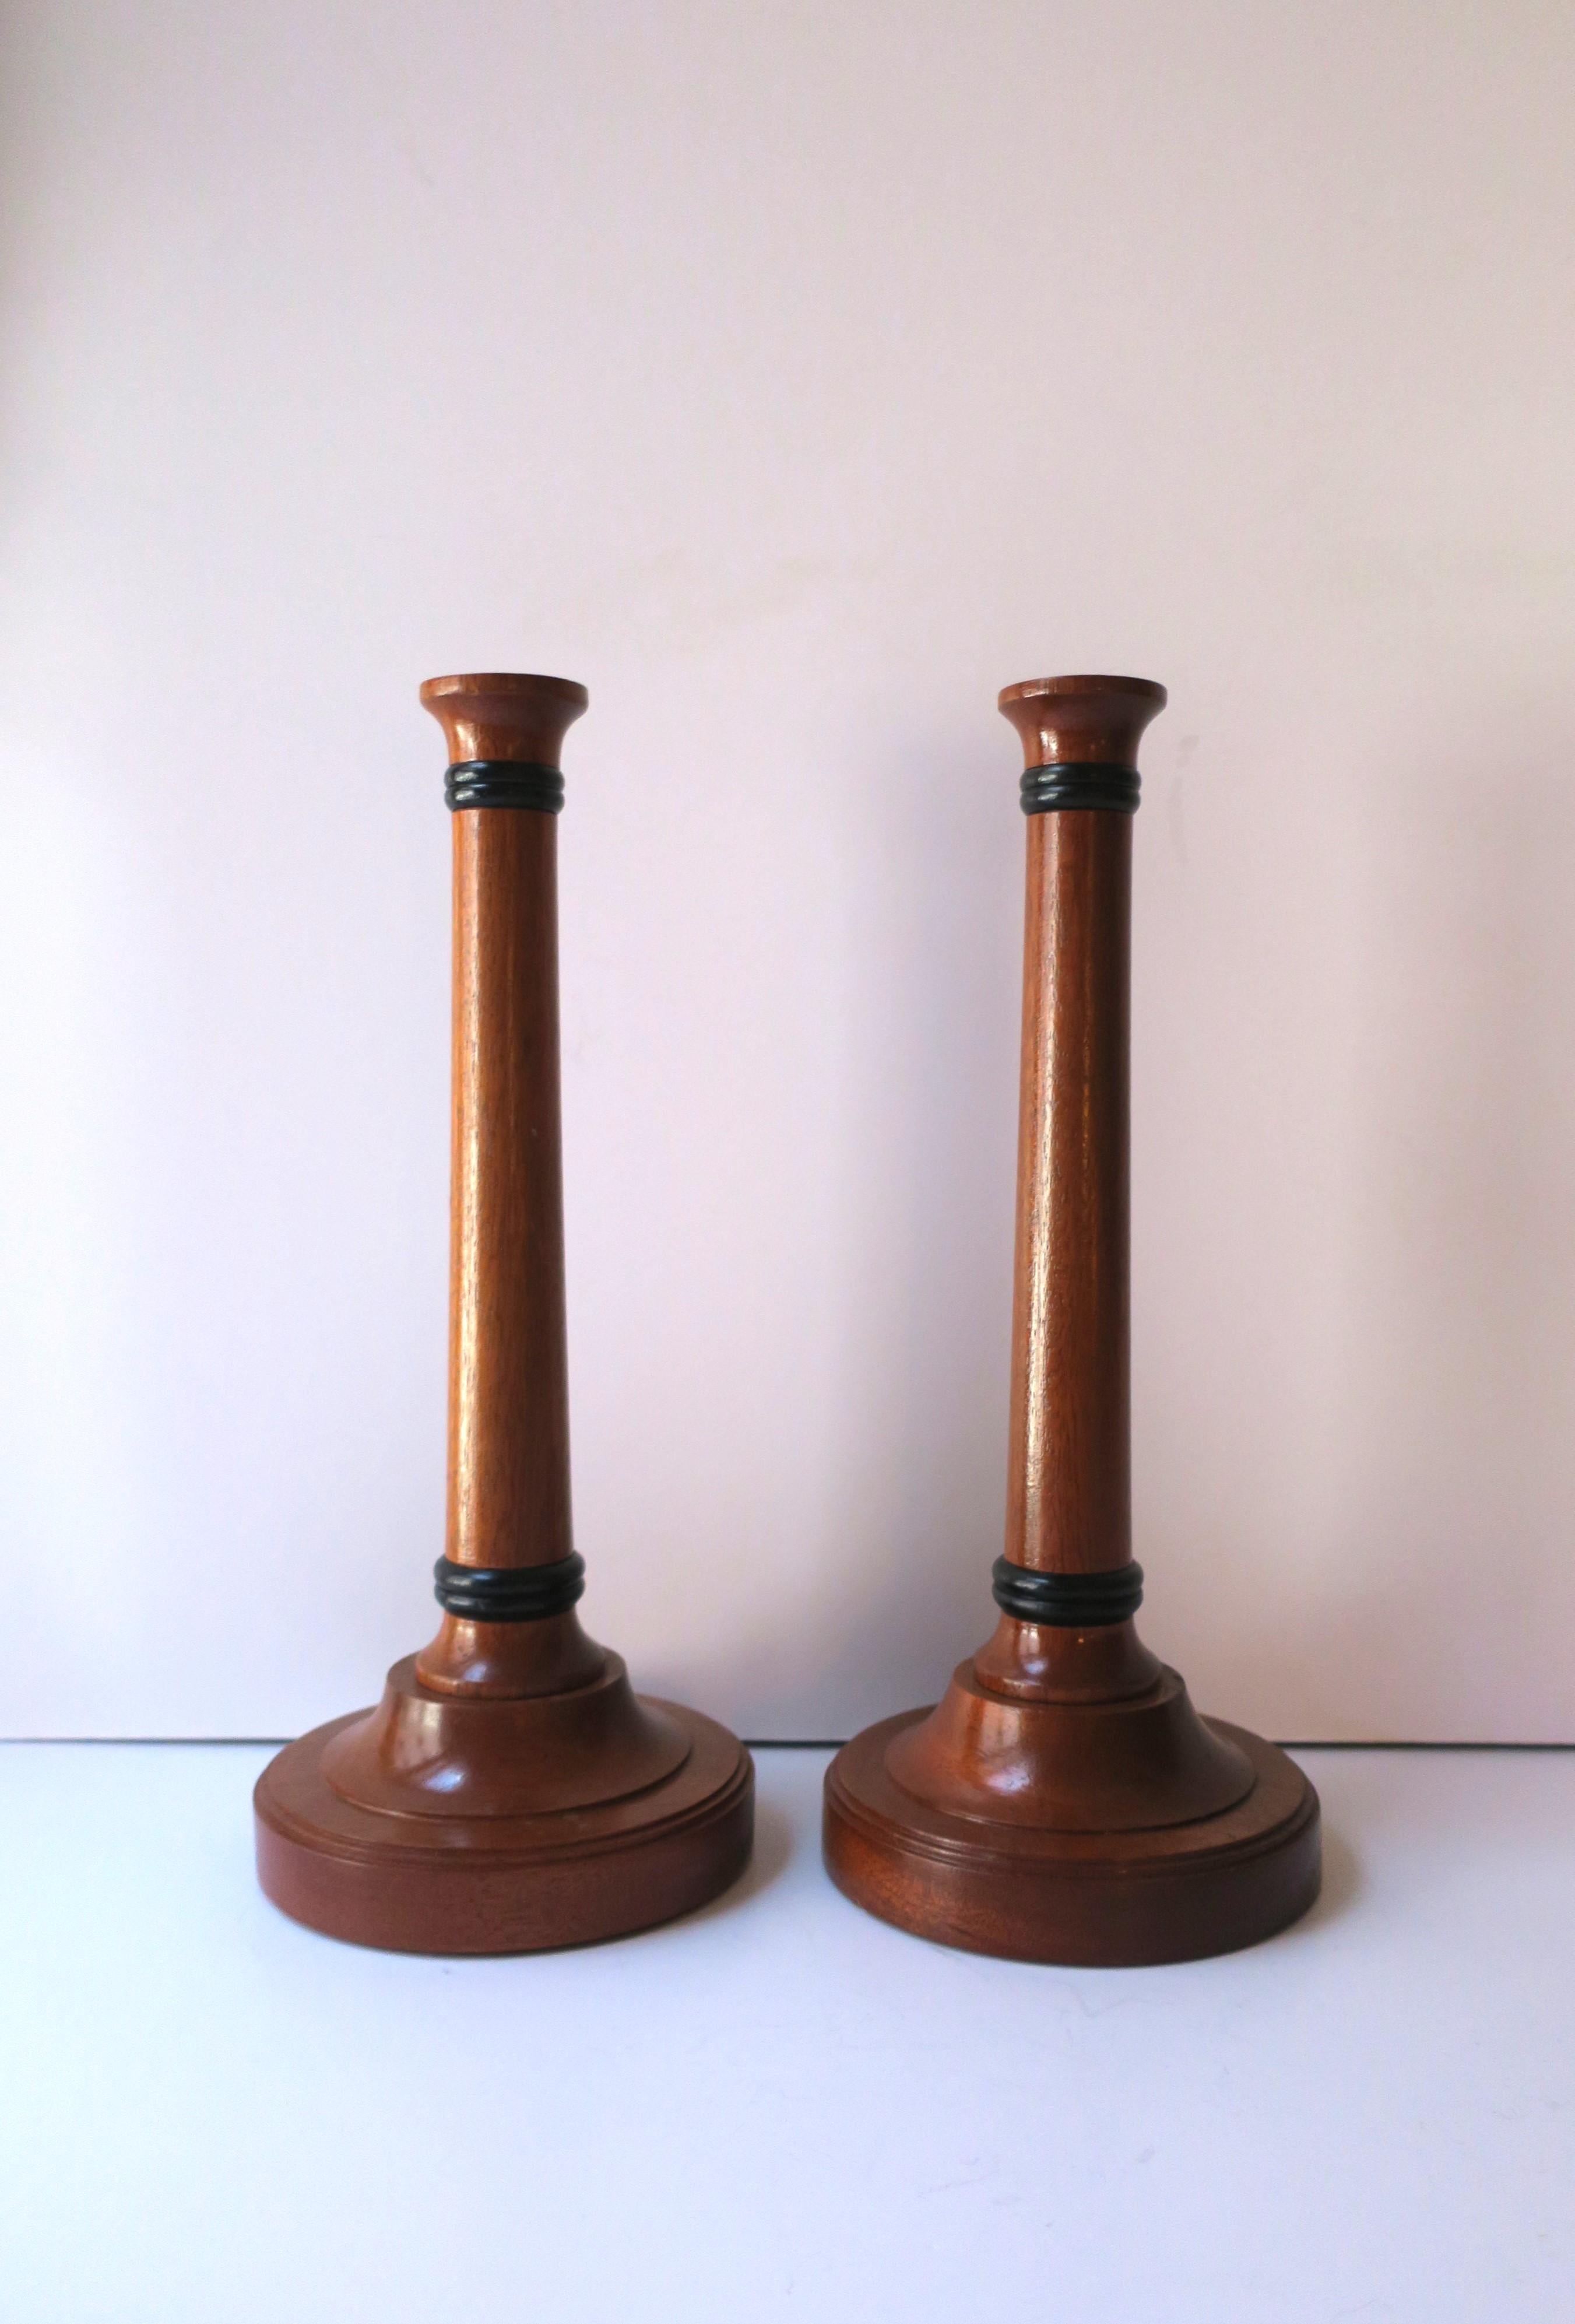 Hand-Crafted English Wood Candlesticks Holders, Pair For Sale